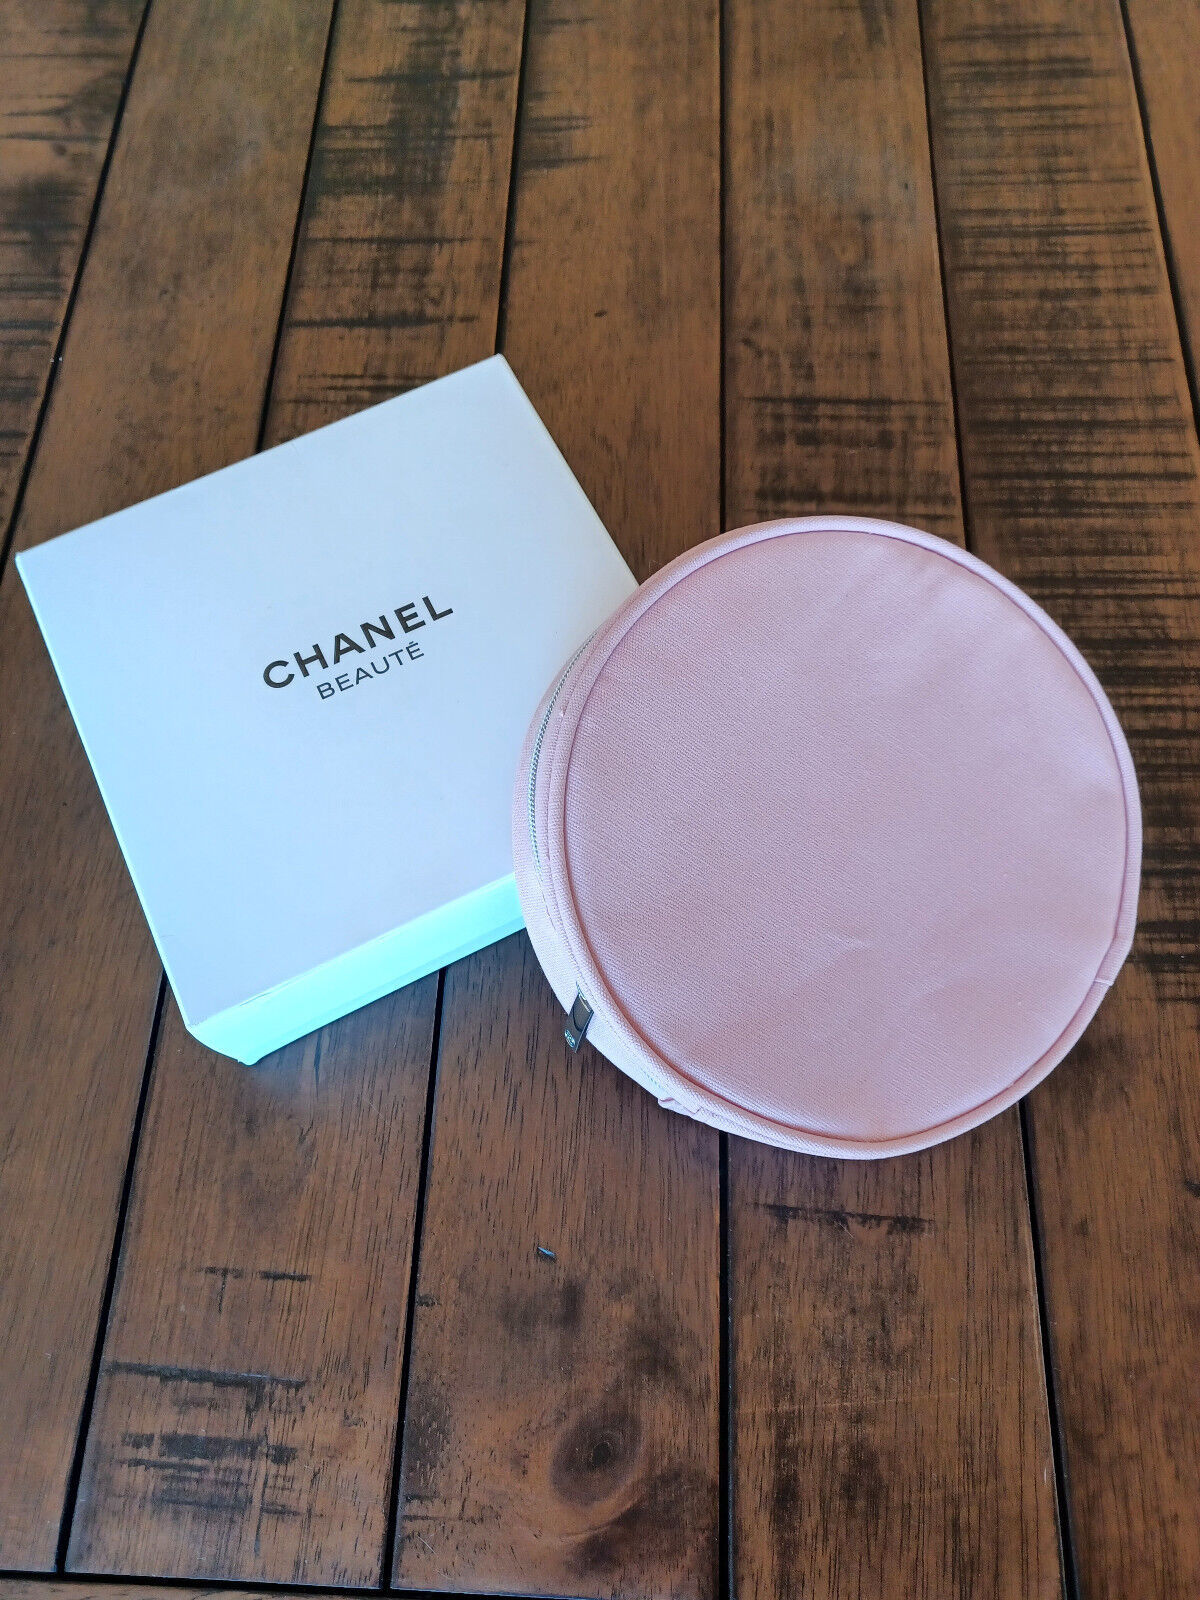 chanel beaute cosmetic bag